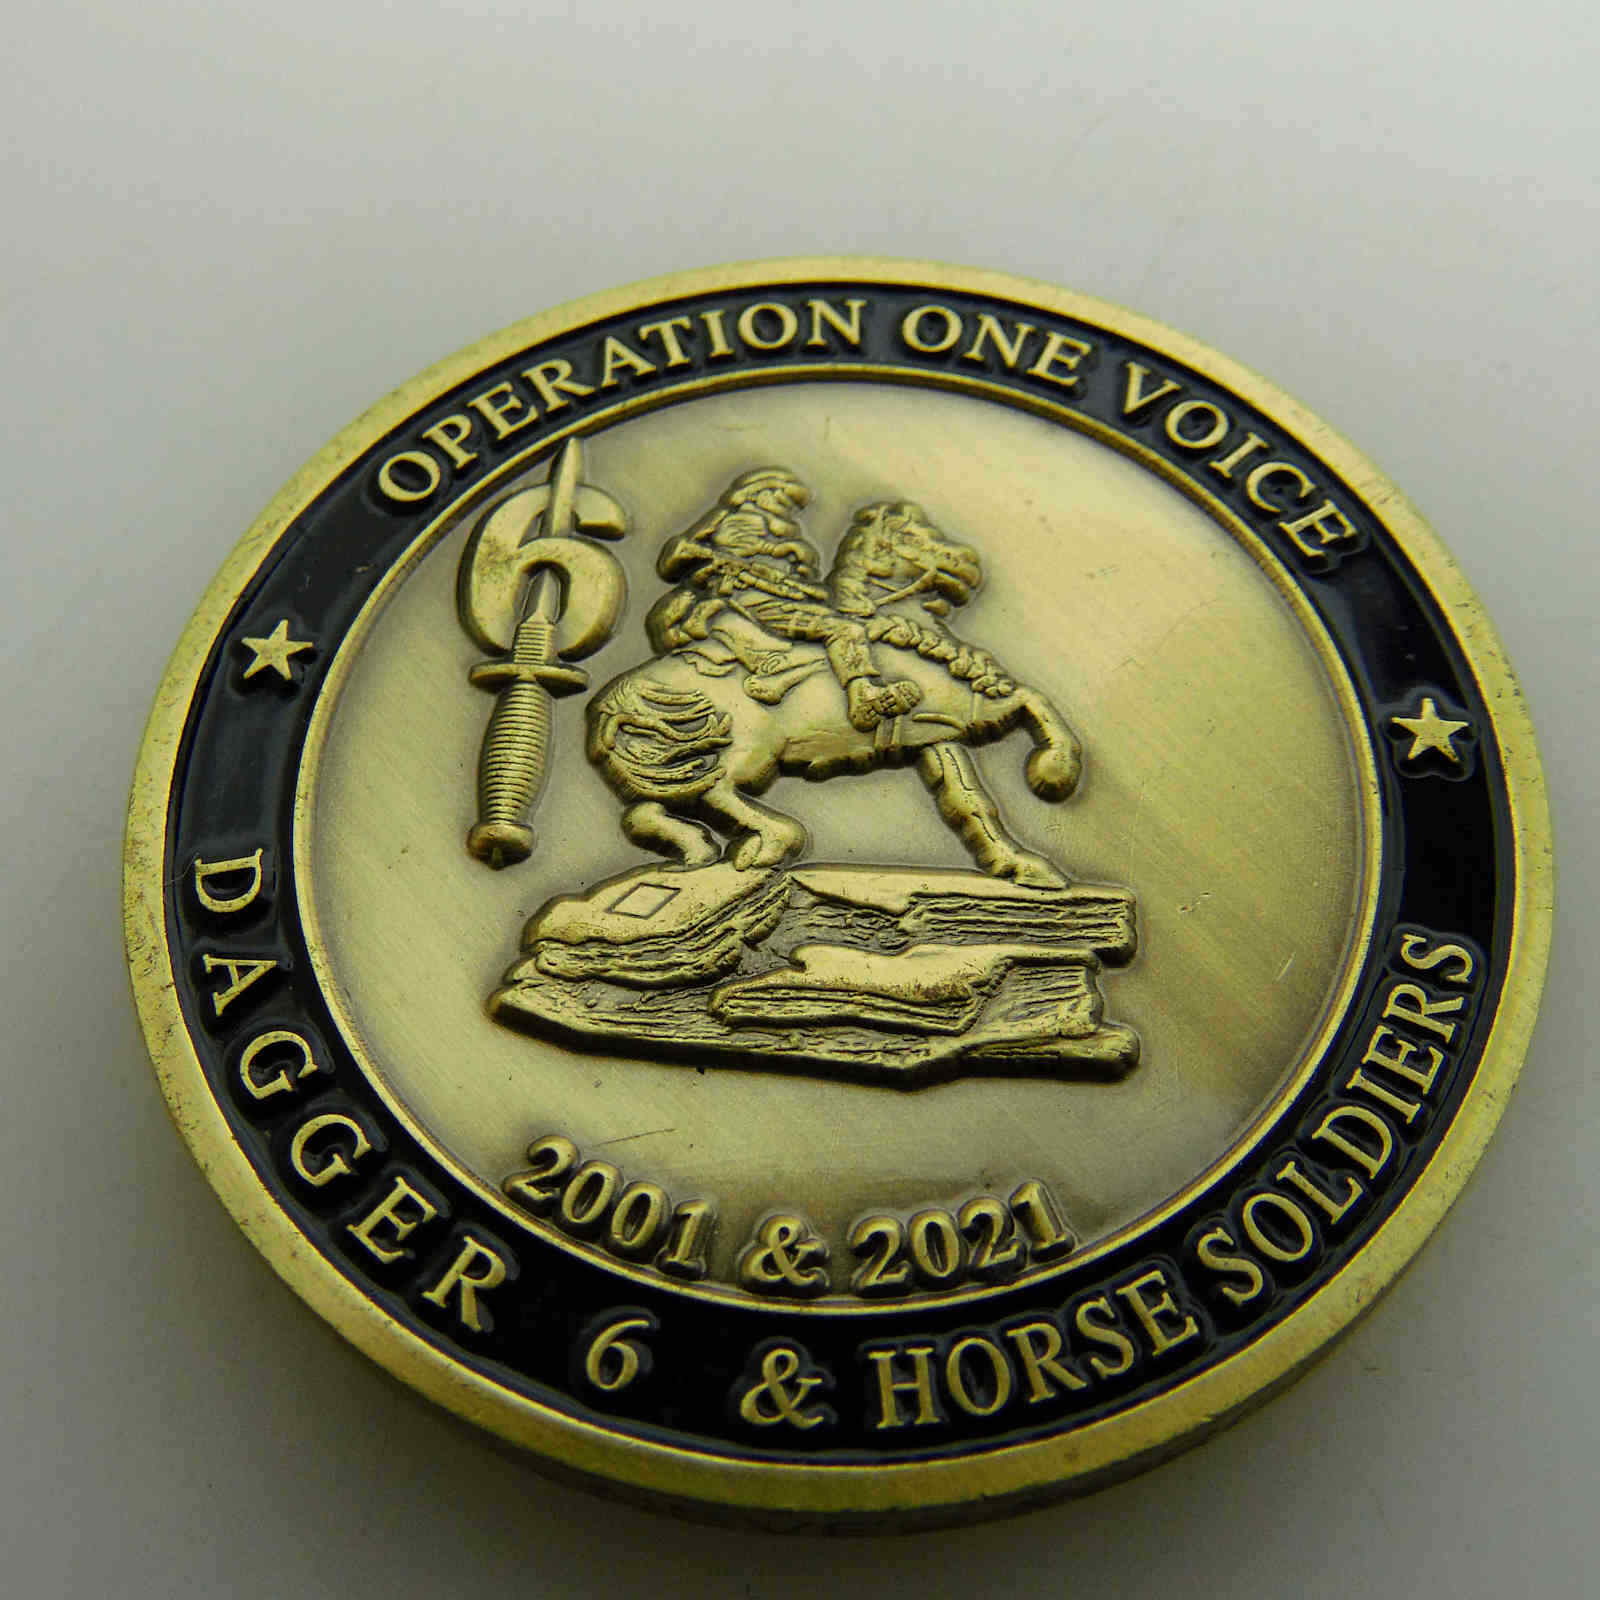 OPERATION ONE VOICE DAGGER 6 HORSE SOLDIERS CHALLENGE COIN